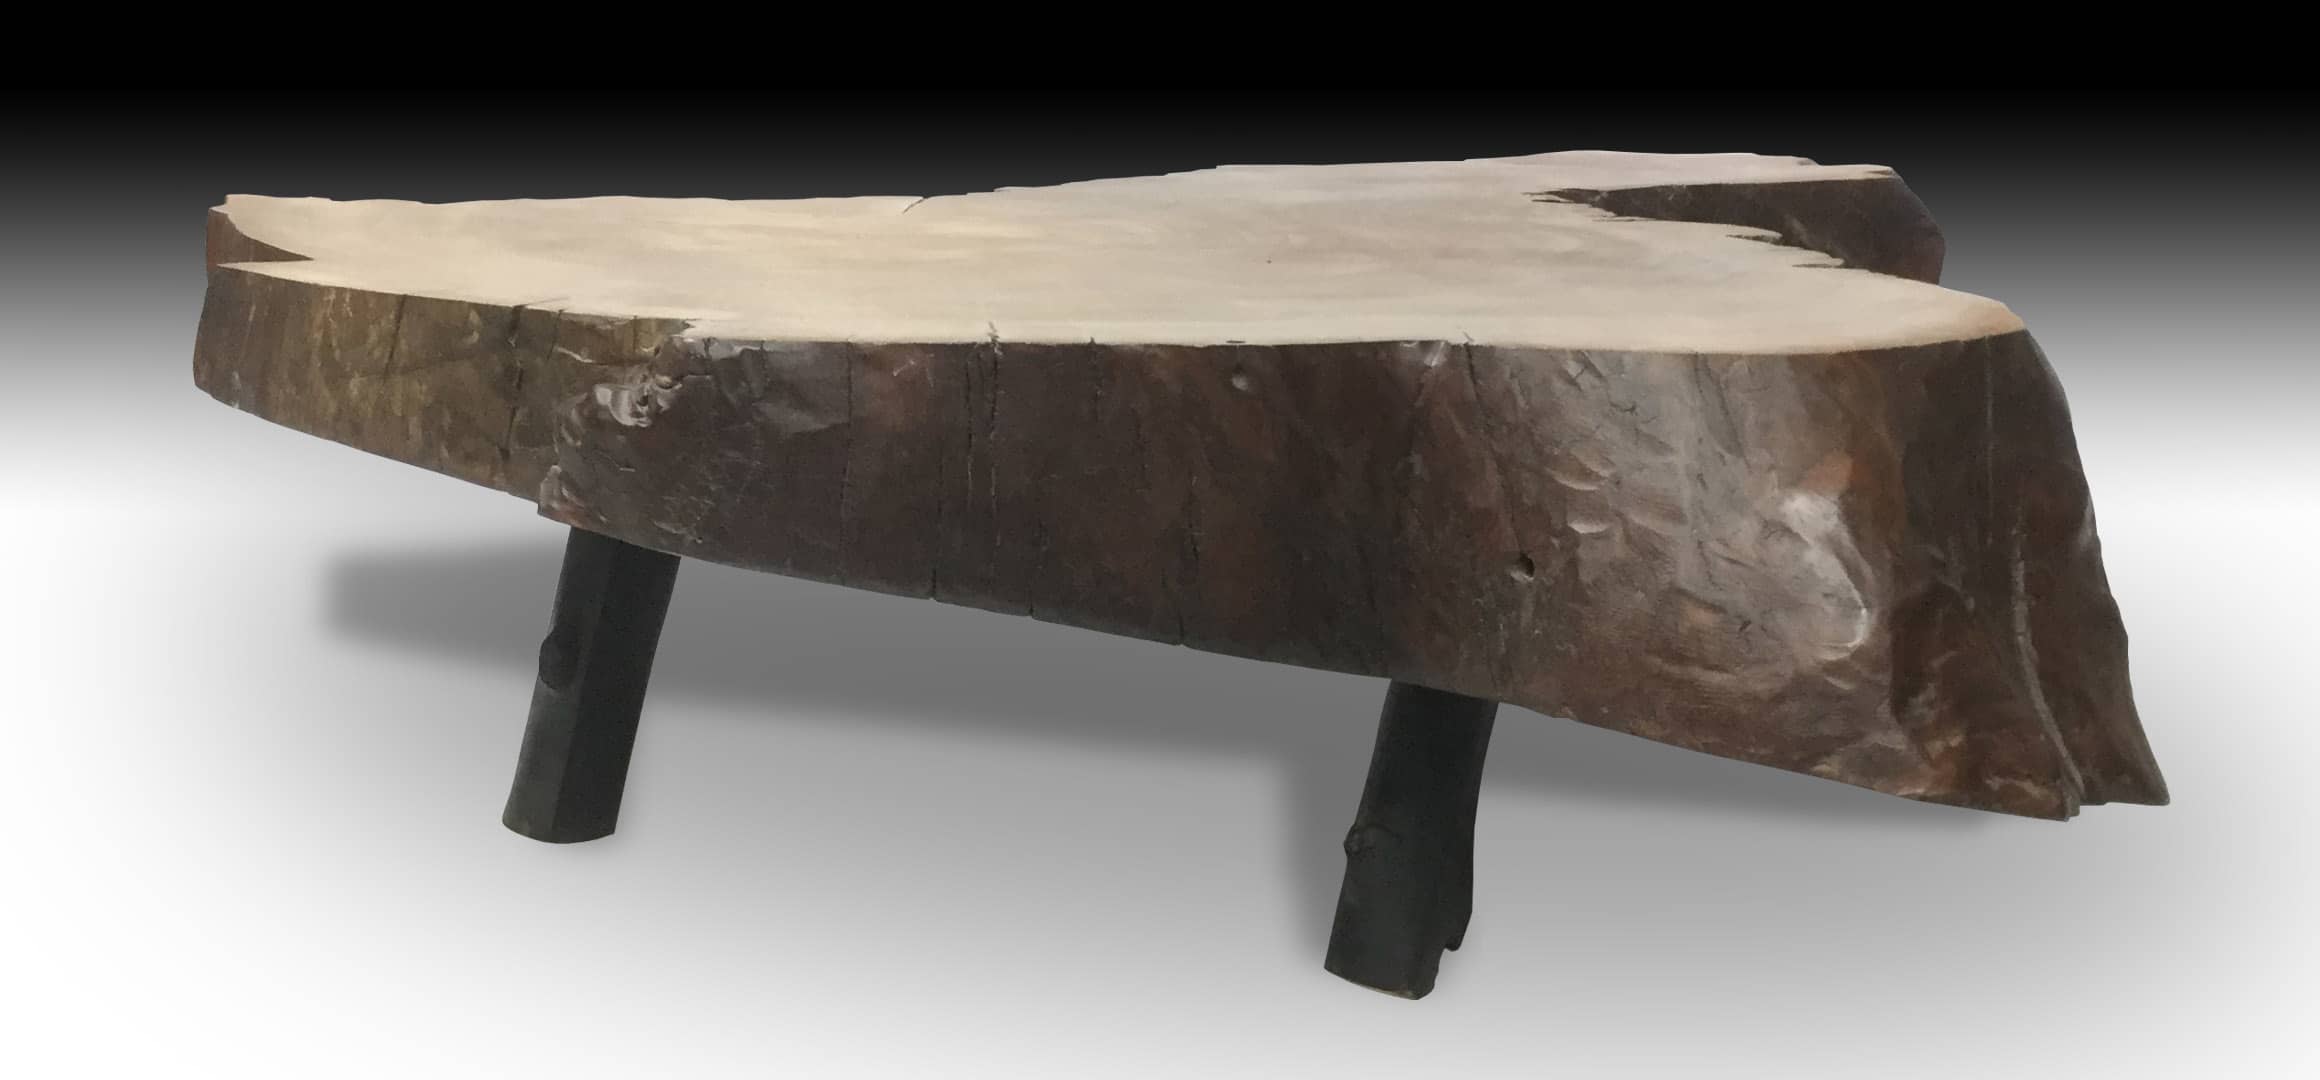 Cliff live edge Mahogany wood coffee table with wood base